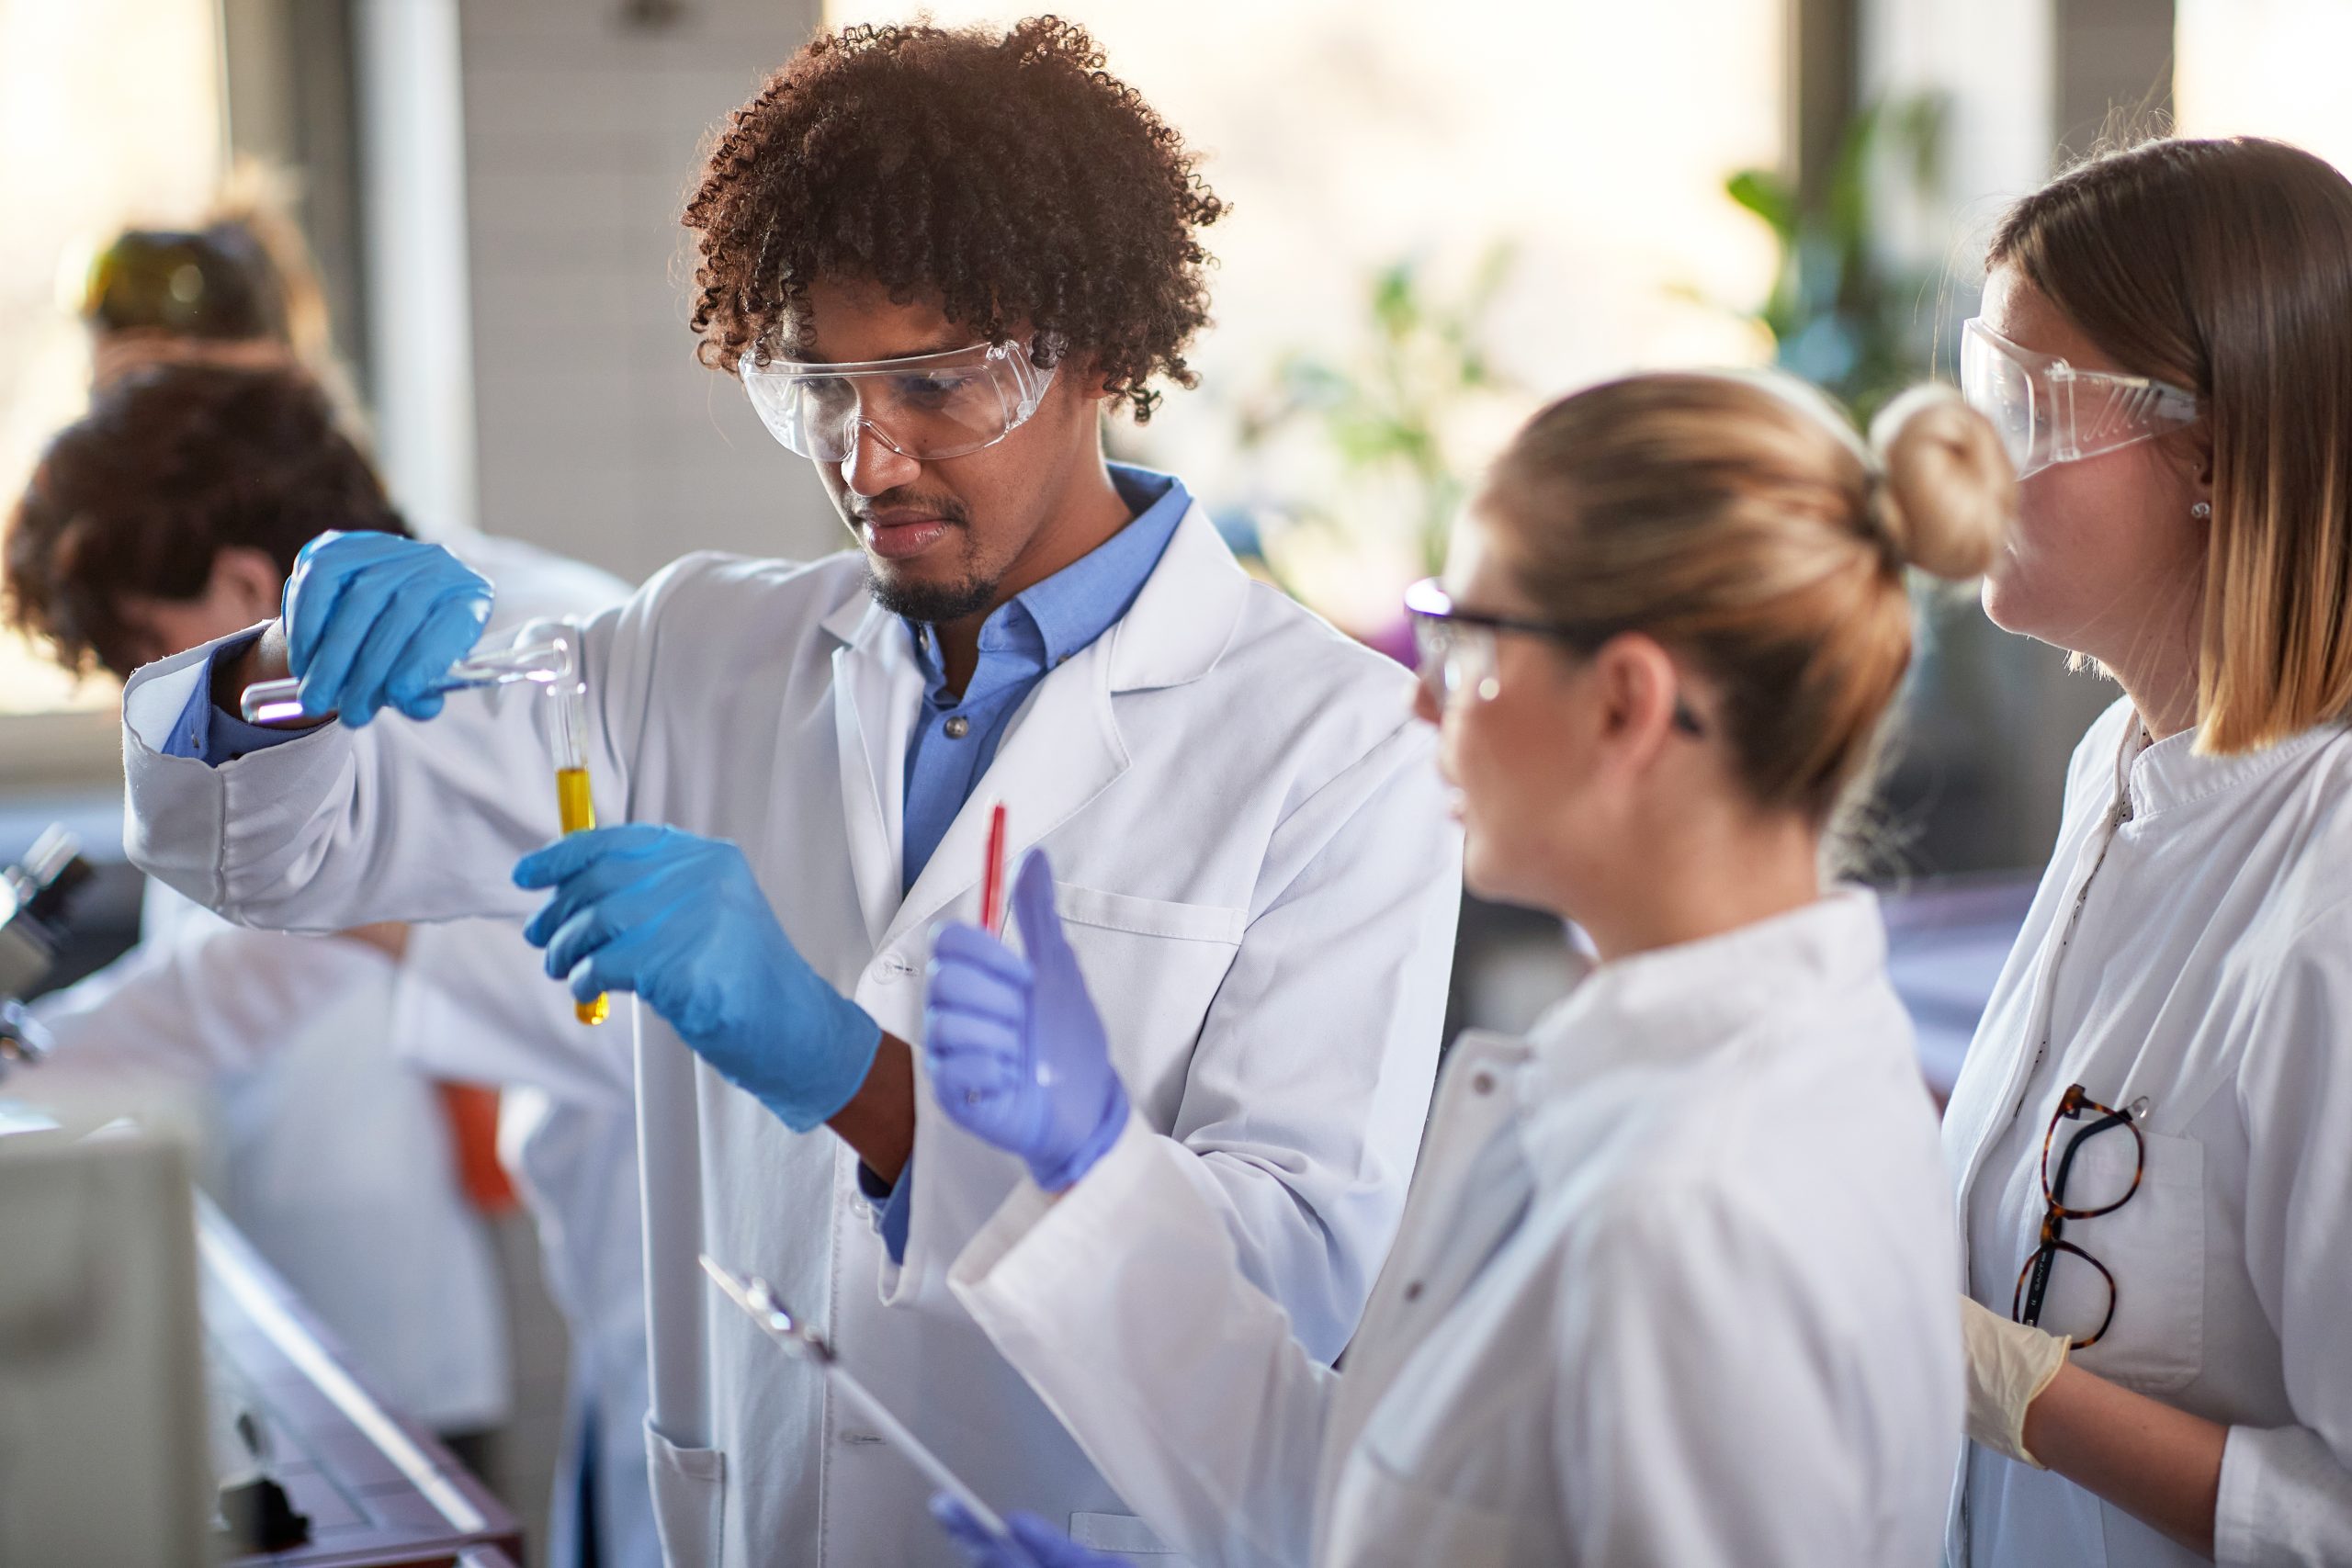 Image of lab workers for our FAQ on What Is the Best Degree Path for Becoming an Epidemiologist